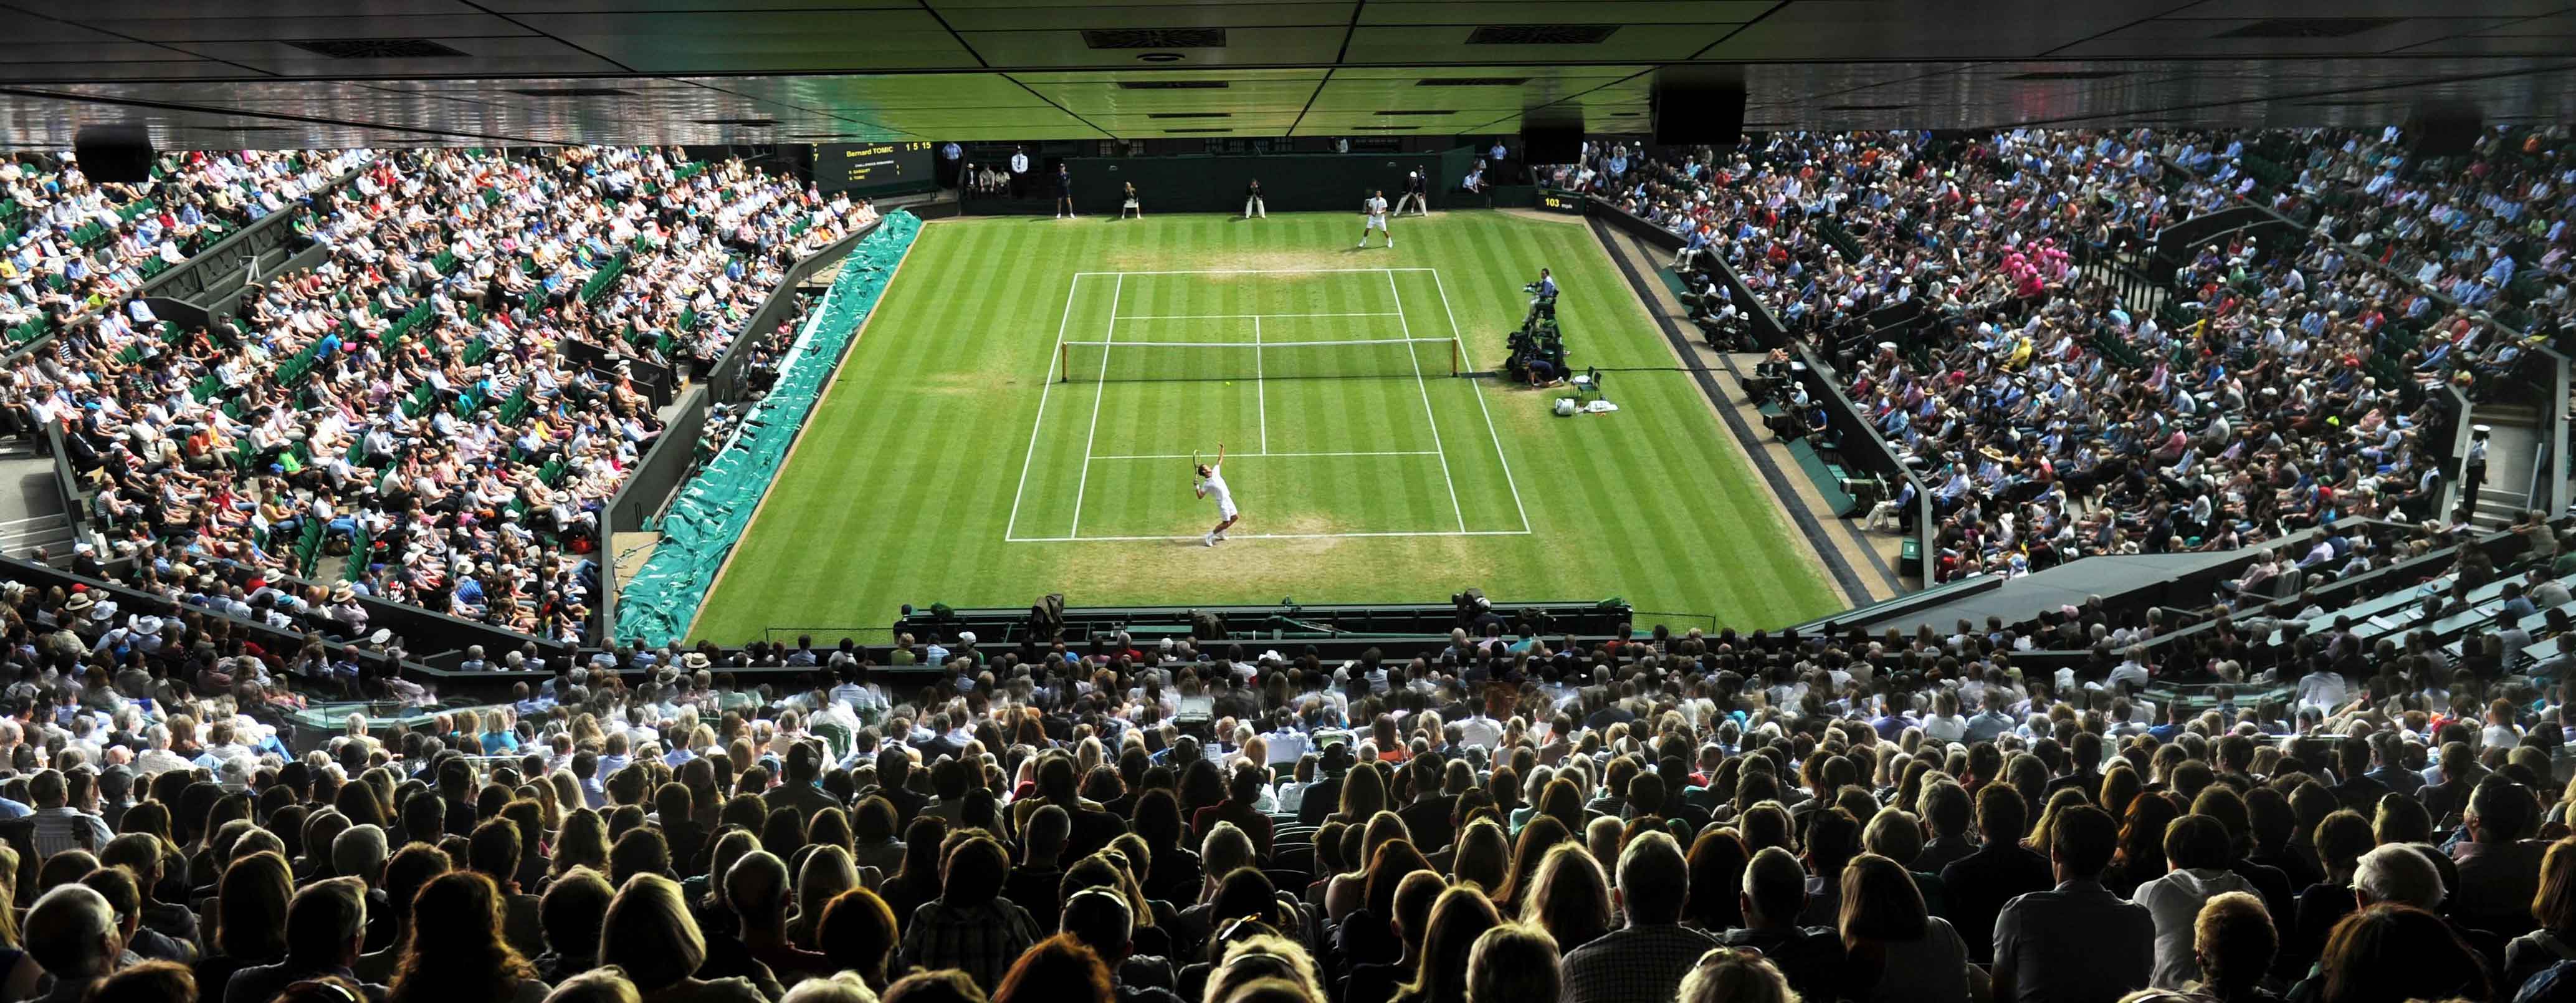 Watches to look out for at Wimbledon